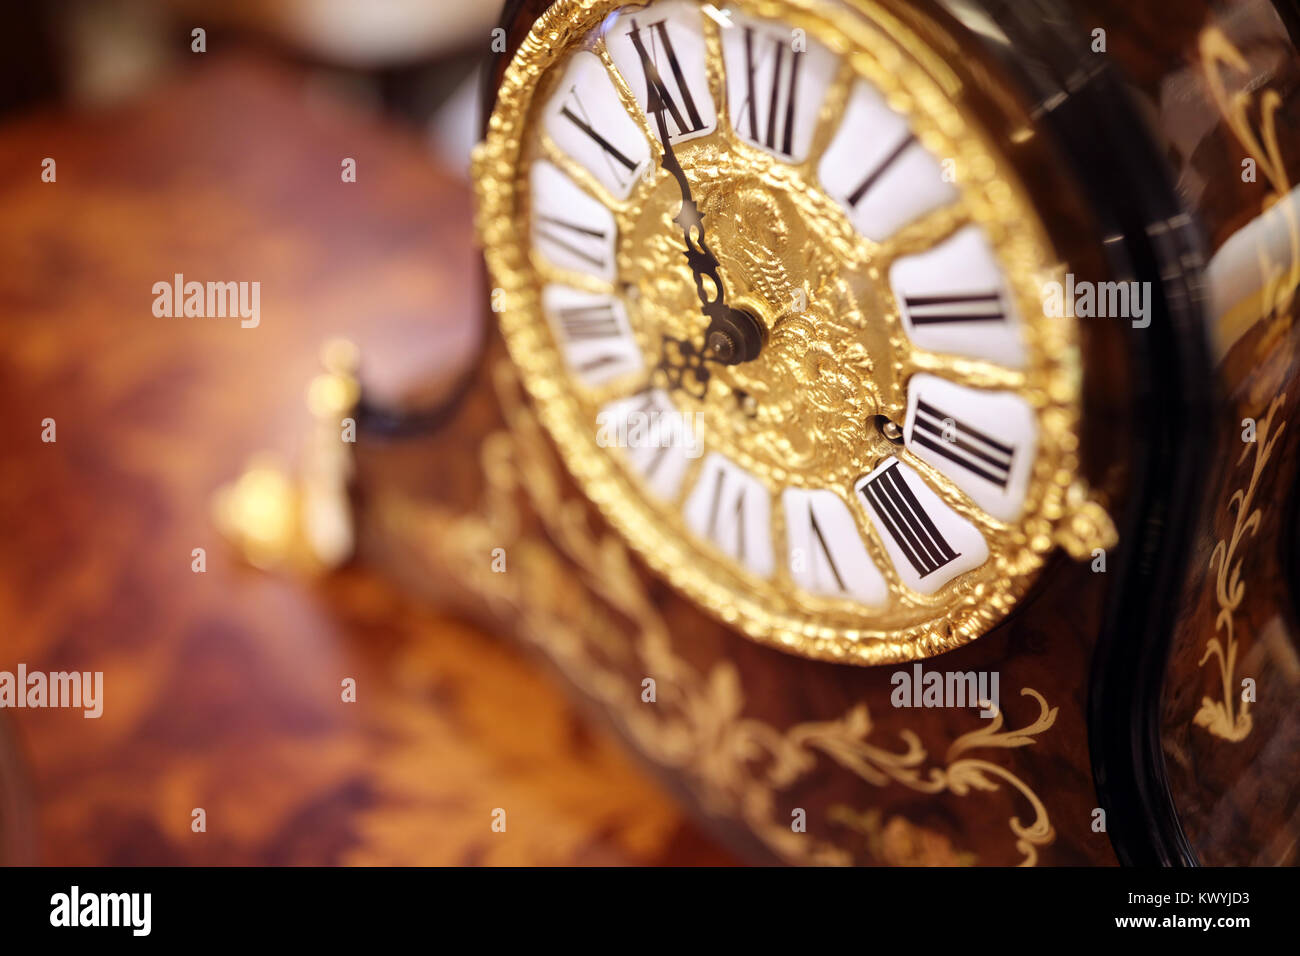 Antique ornate clock background for time concept Stock Photo